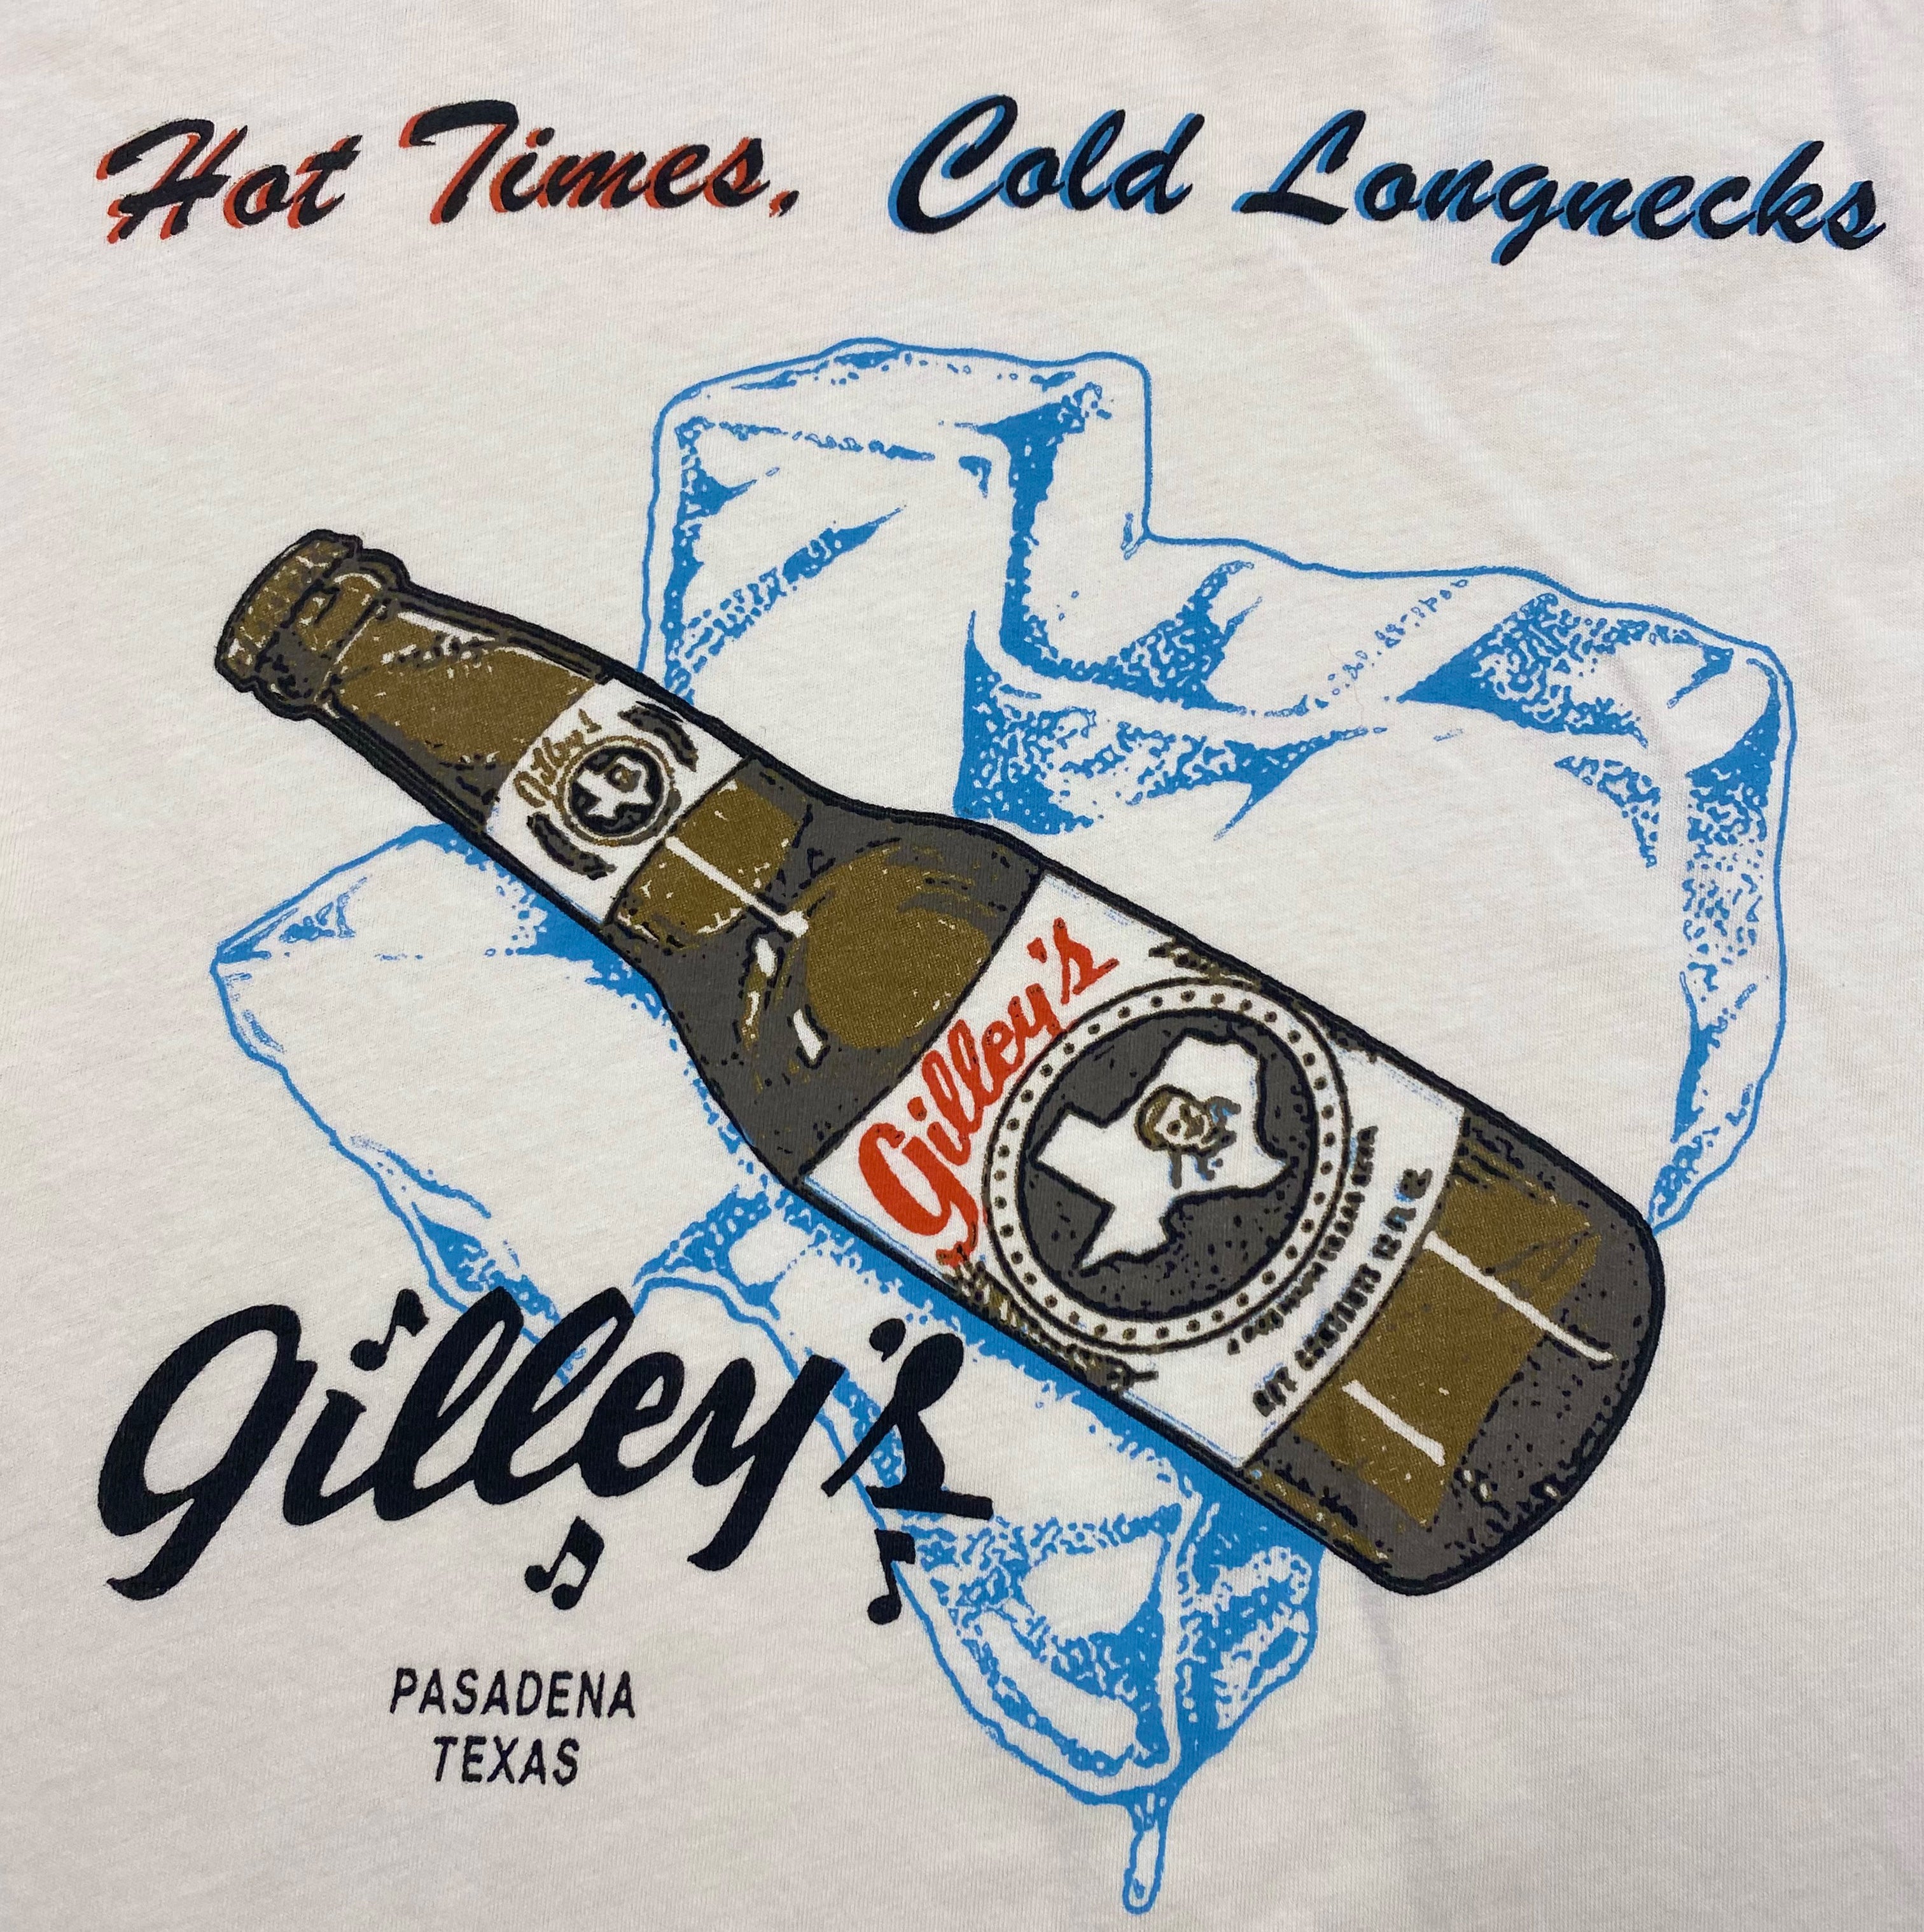 Gilley's Hot Times Cold Longnecks